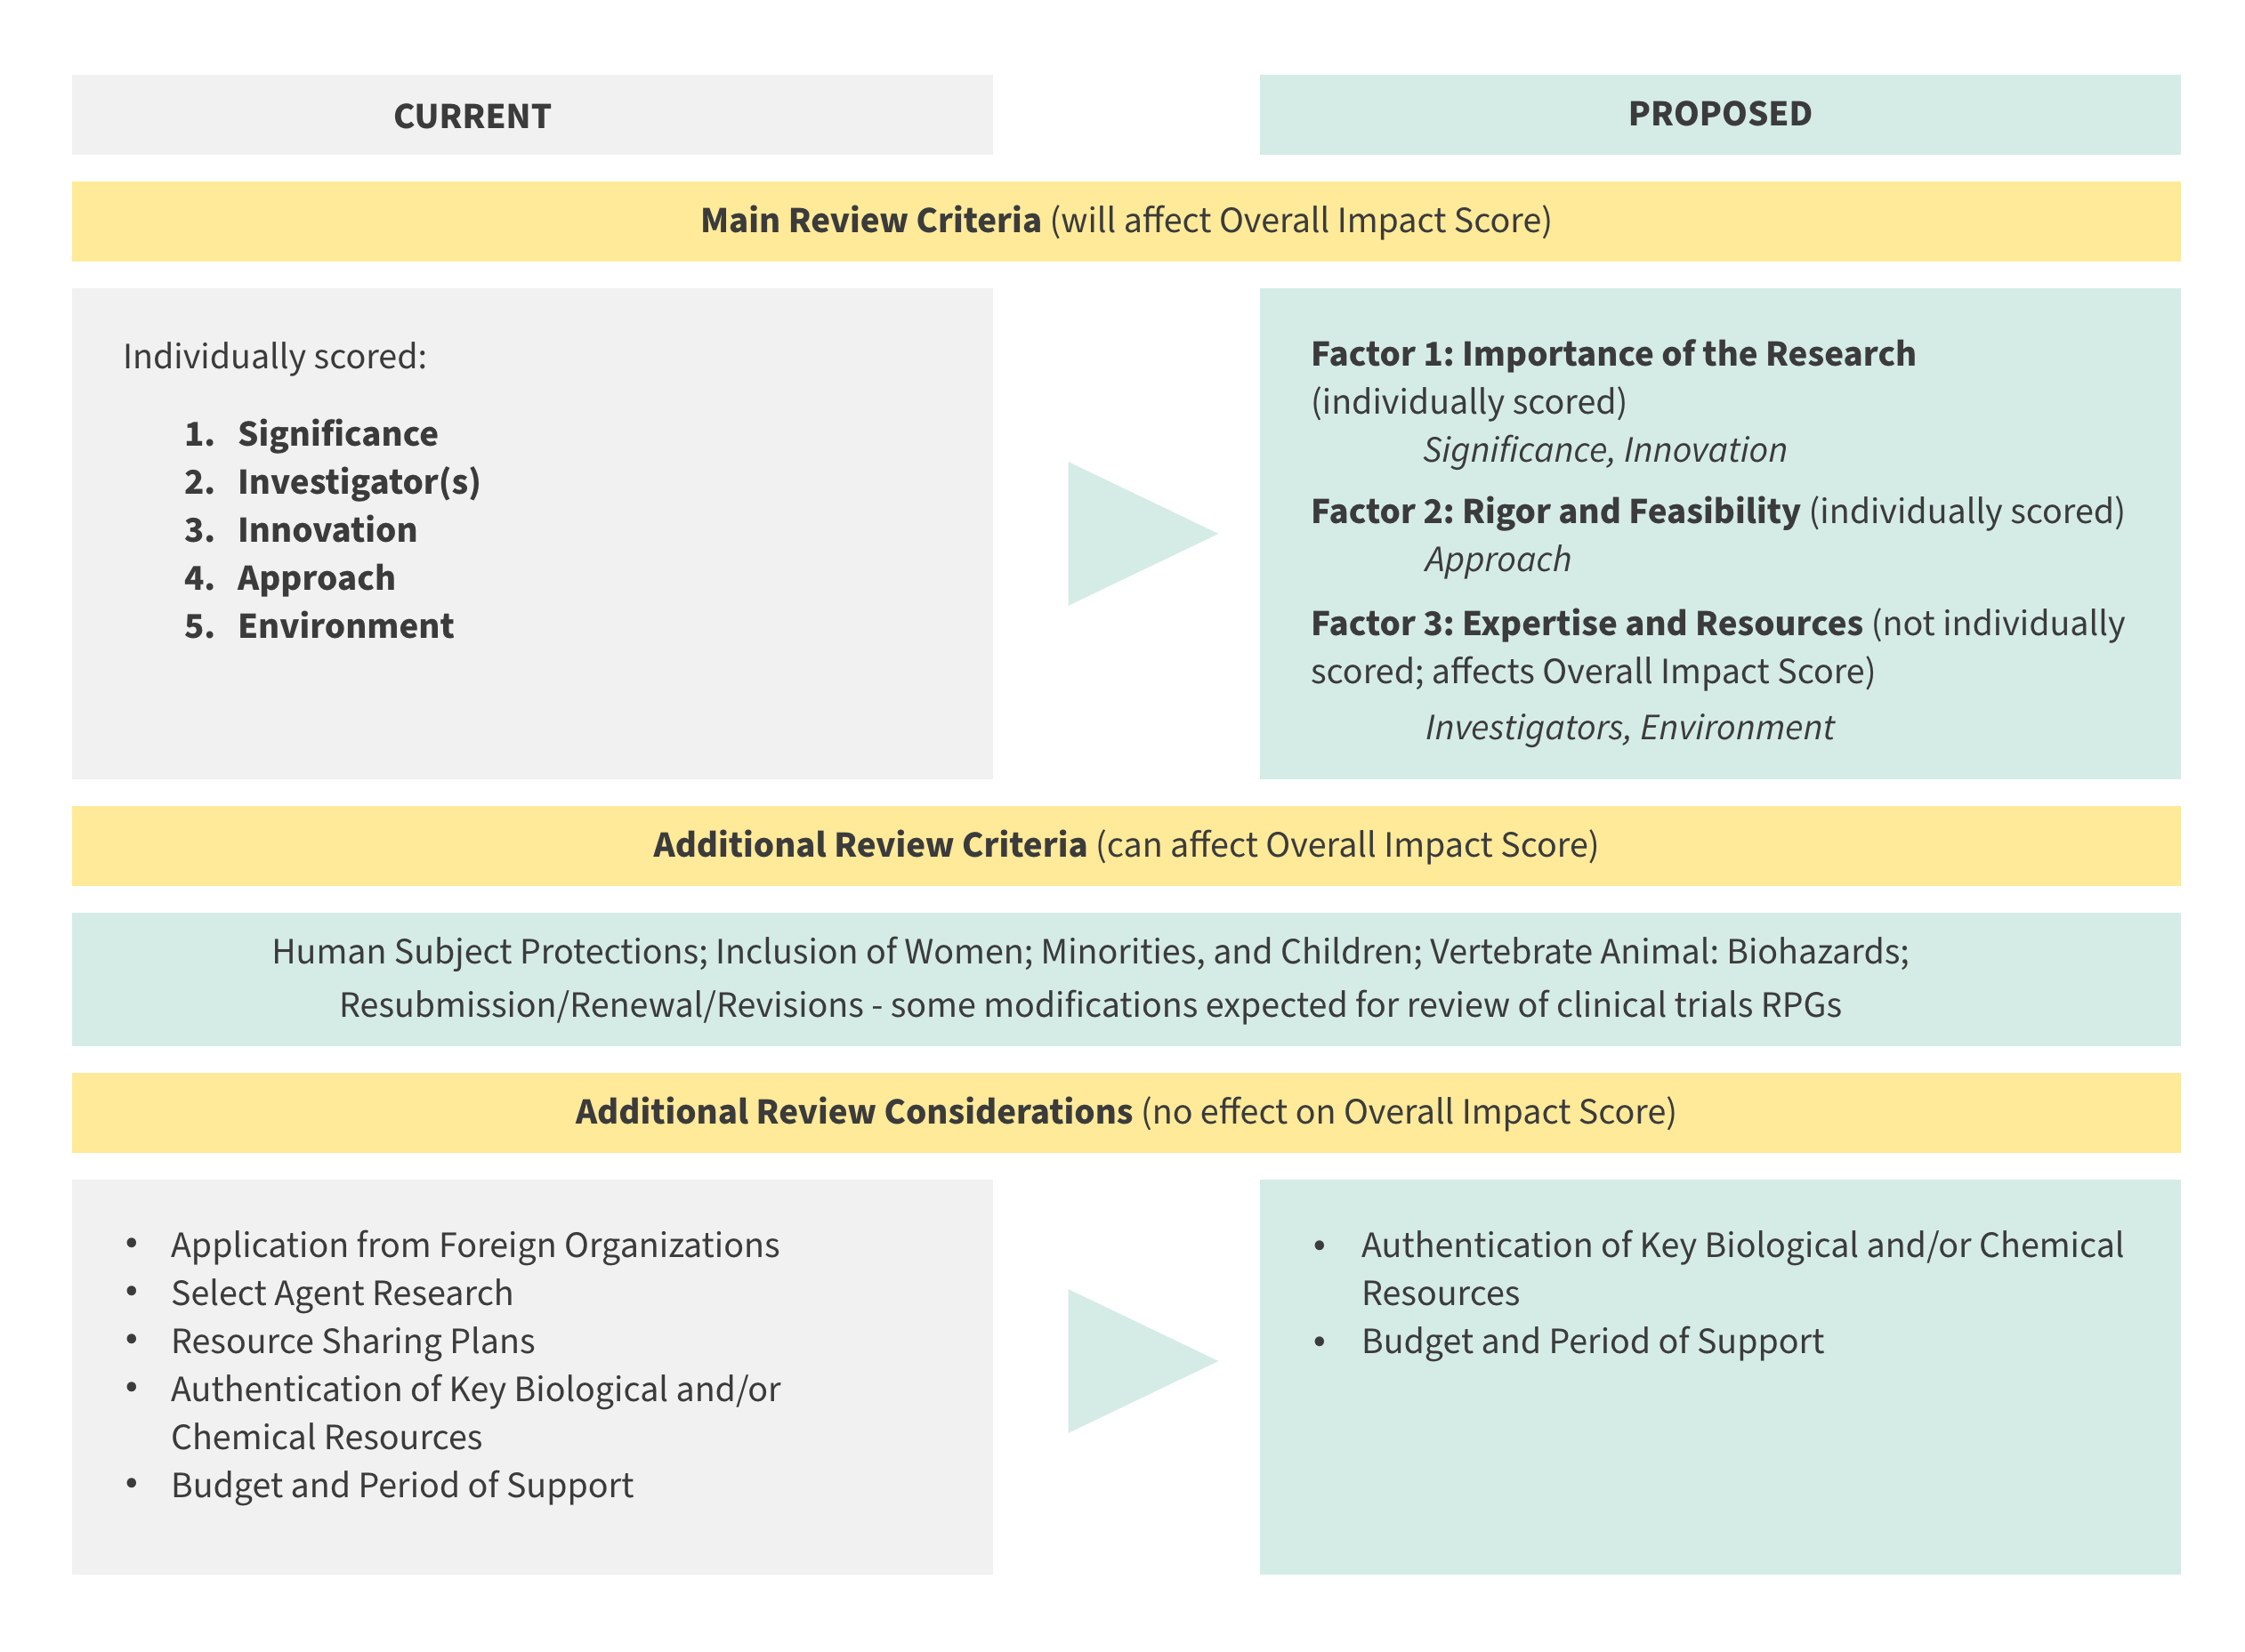 chart showing current main review criteria and the proposed criteria. currently scored as strengths/weaknesses, the proposed would be 3 factors. additional review criteria includes human subjects protections, and other additional review considerations include authentication of key biological resources.